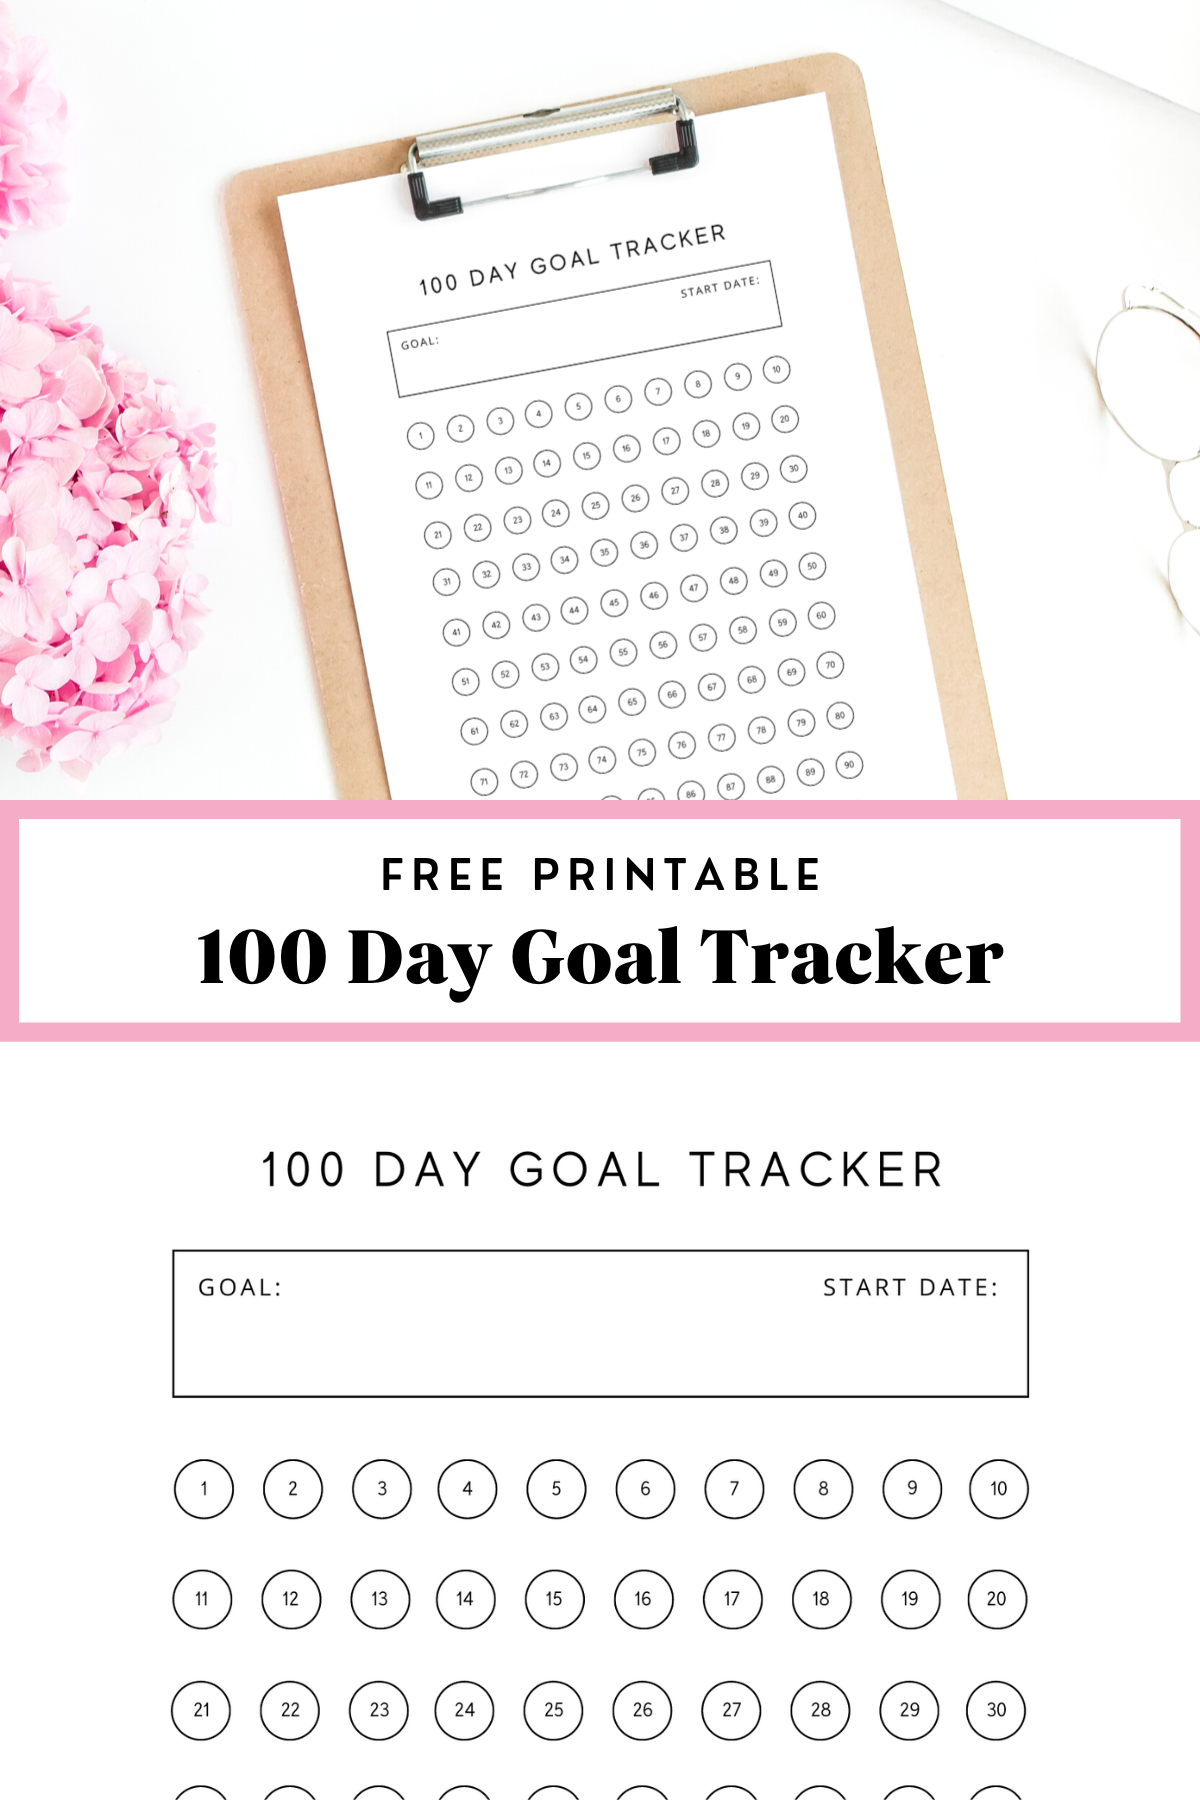 free-printable-100-day-goal-tracker-gathering-beauty